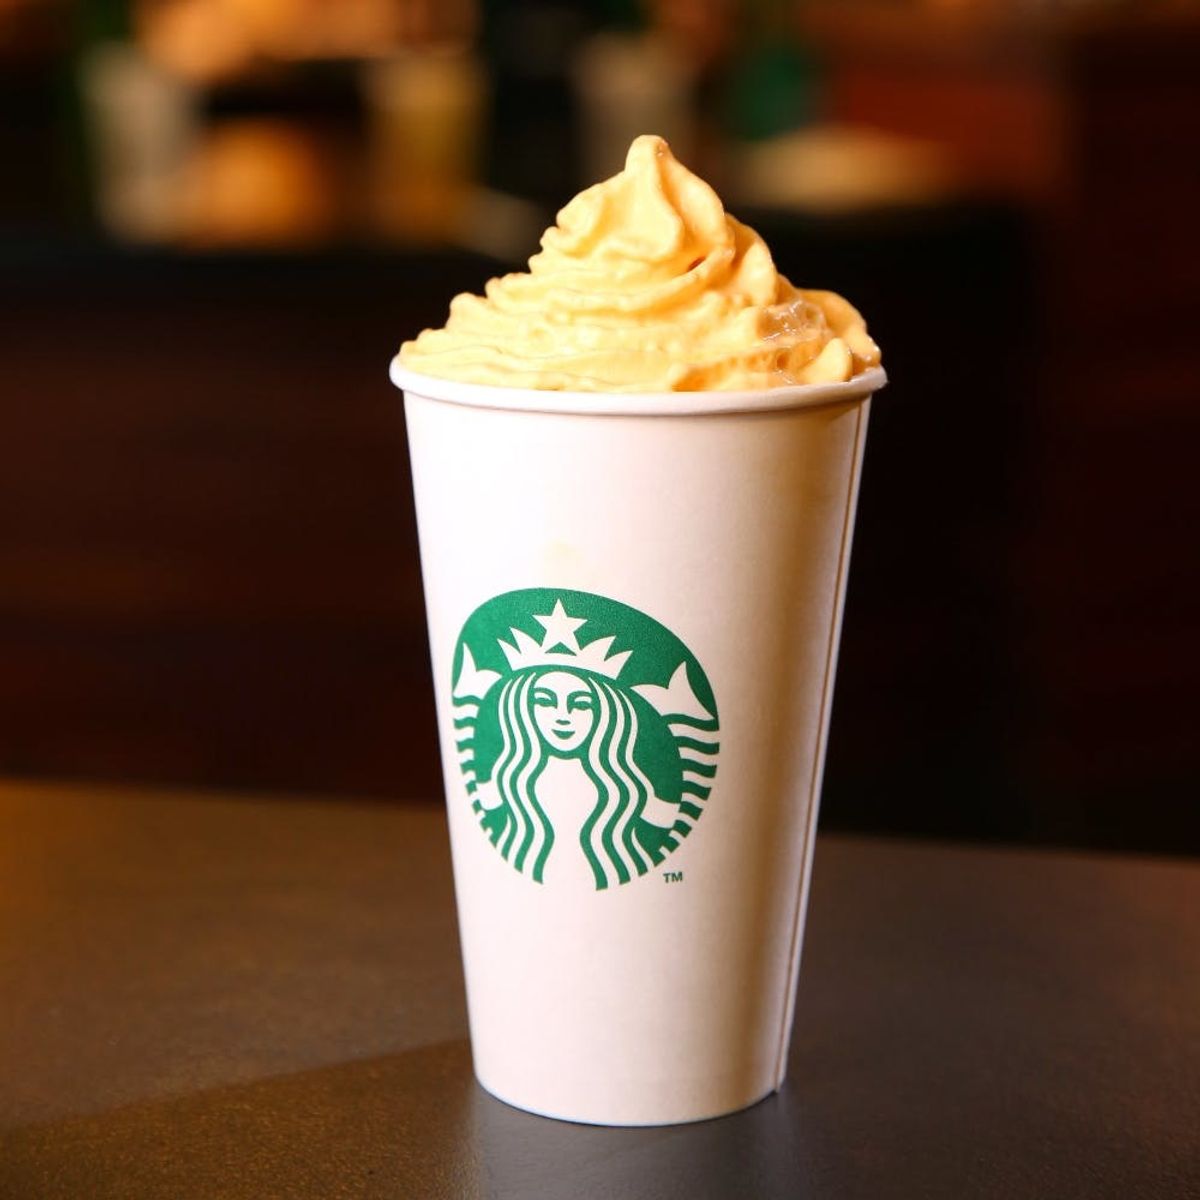 Celebrate PSL’s Birthday at Starbucks With FREE Pumpkin Spice Whipped Cream